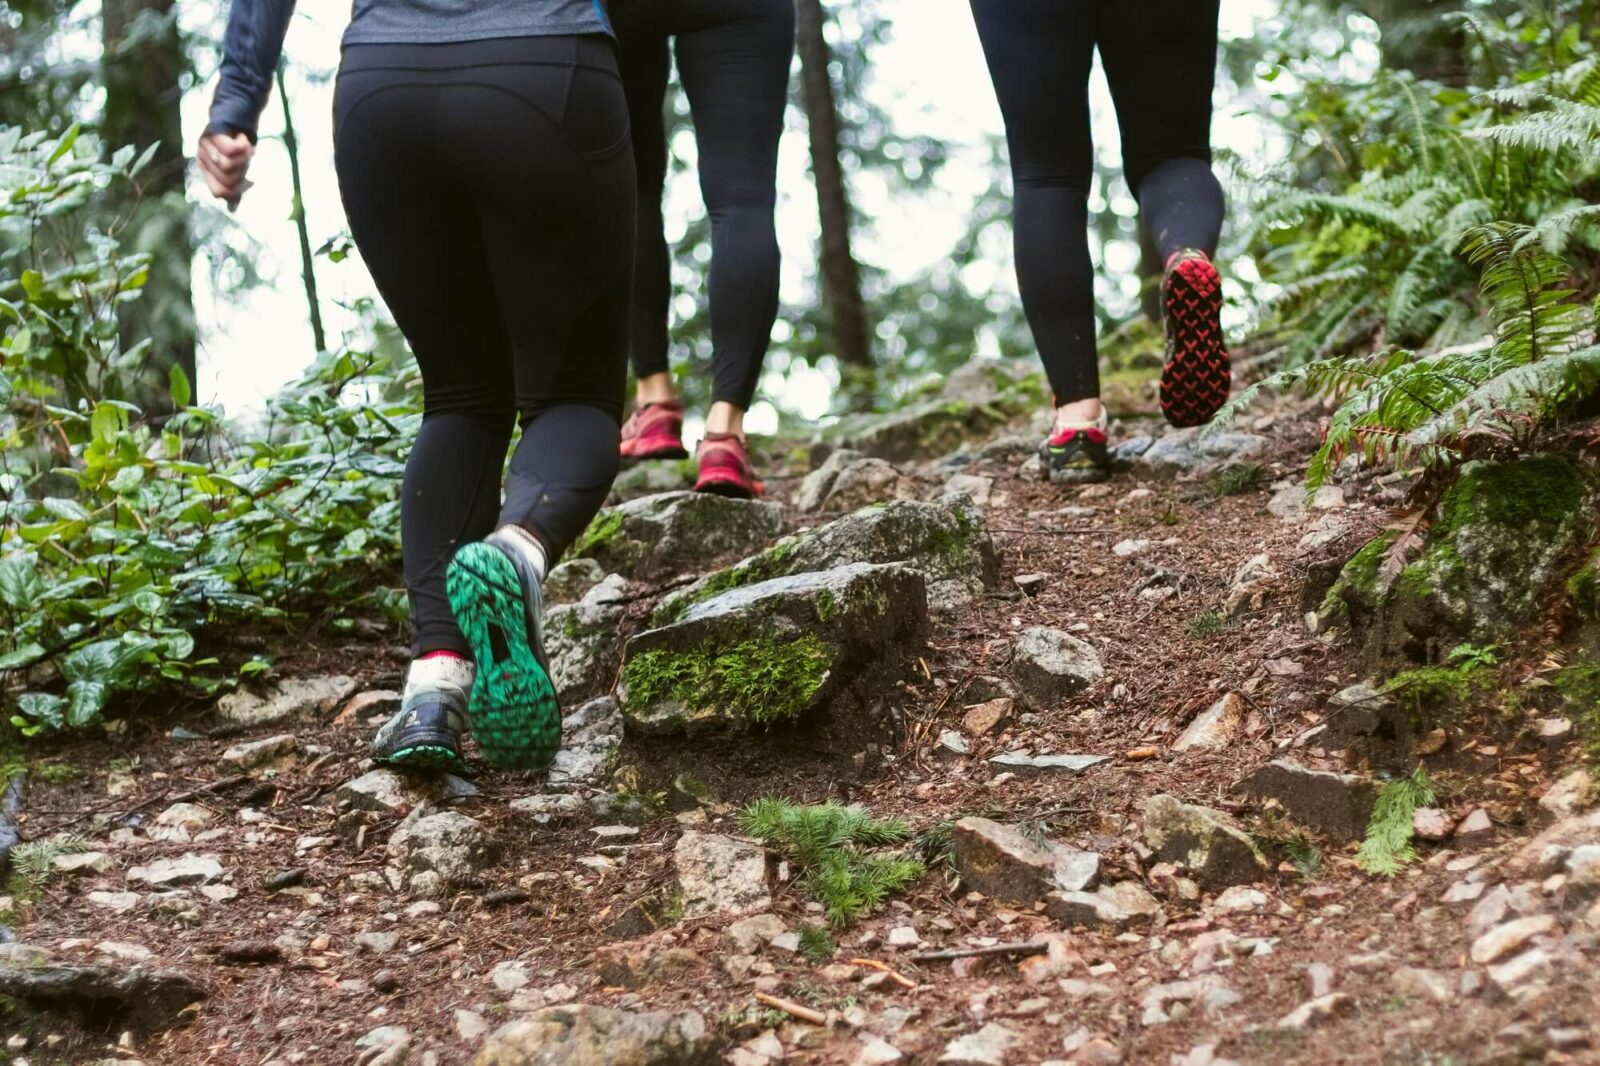 Ditch the worries about weight gain over the holidays, and lace up your walking shoes instead. Great for body and mind! Image: Unsplash